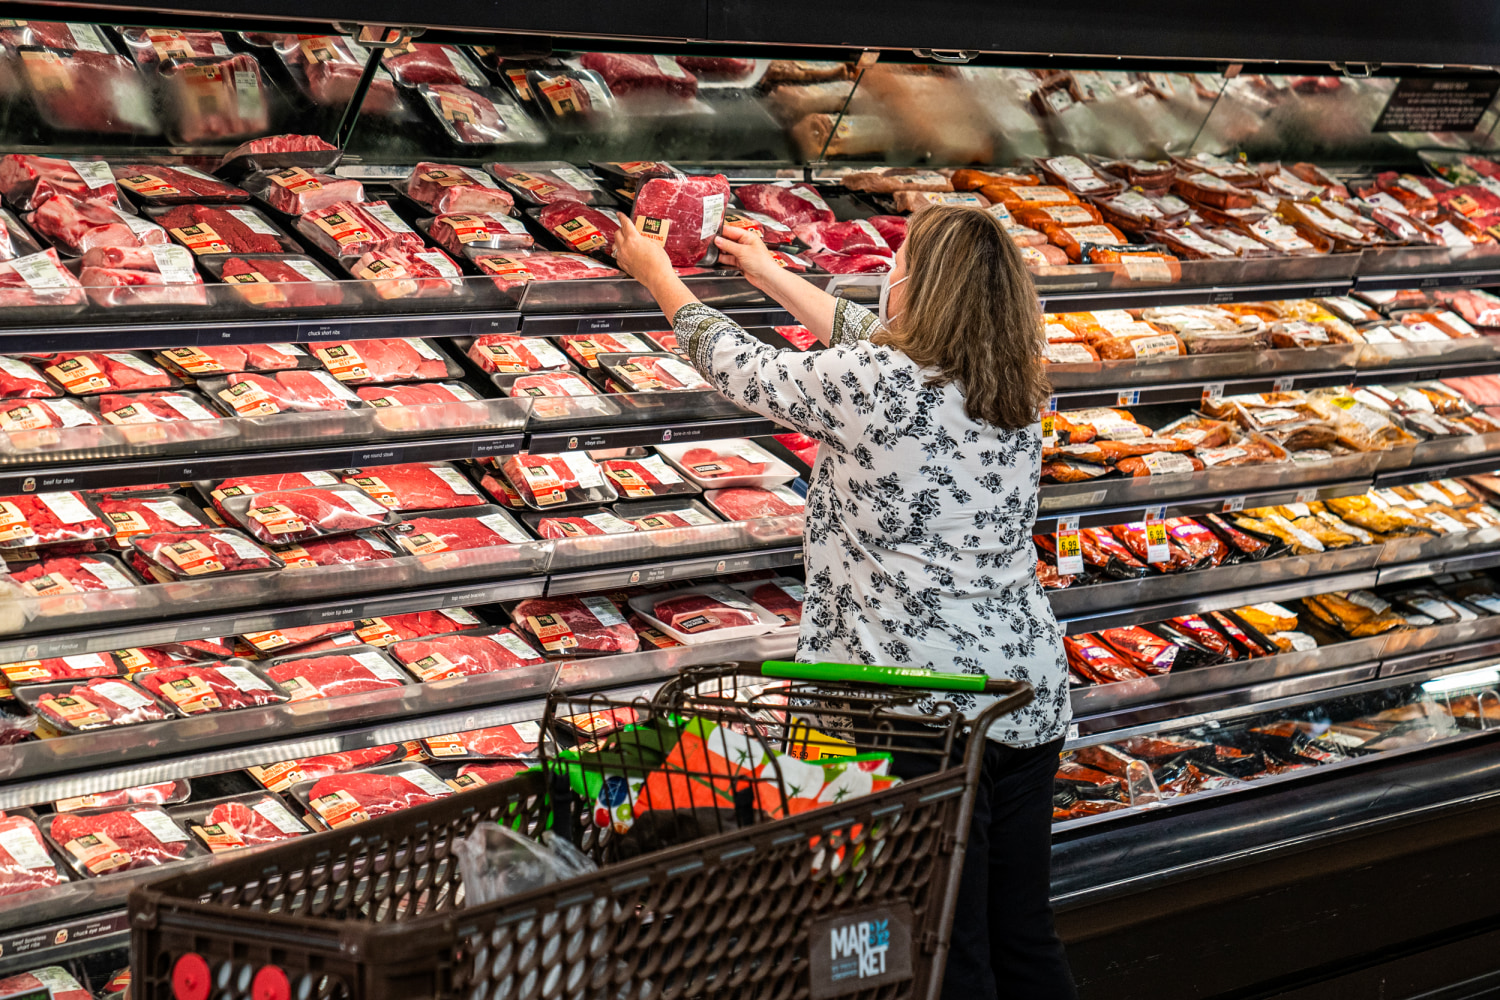 U.S. Beef Is Sizzling After Buyers Clean Out Grocery Shelves - Bloomberg